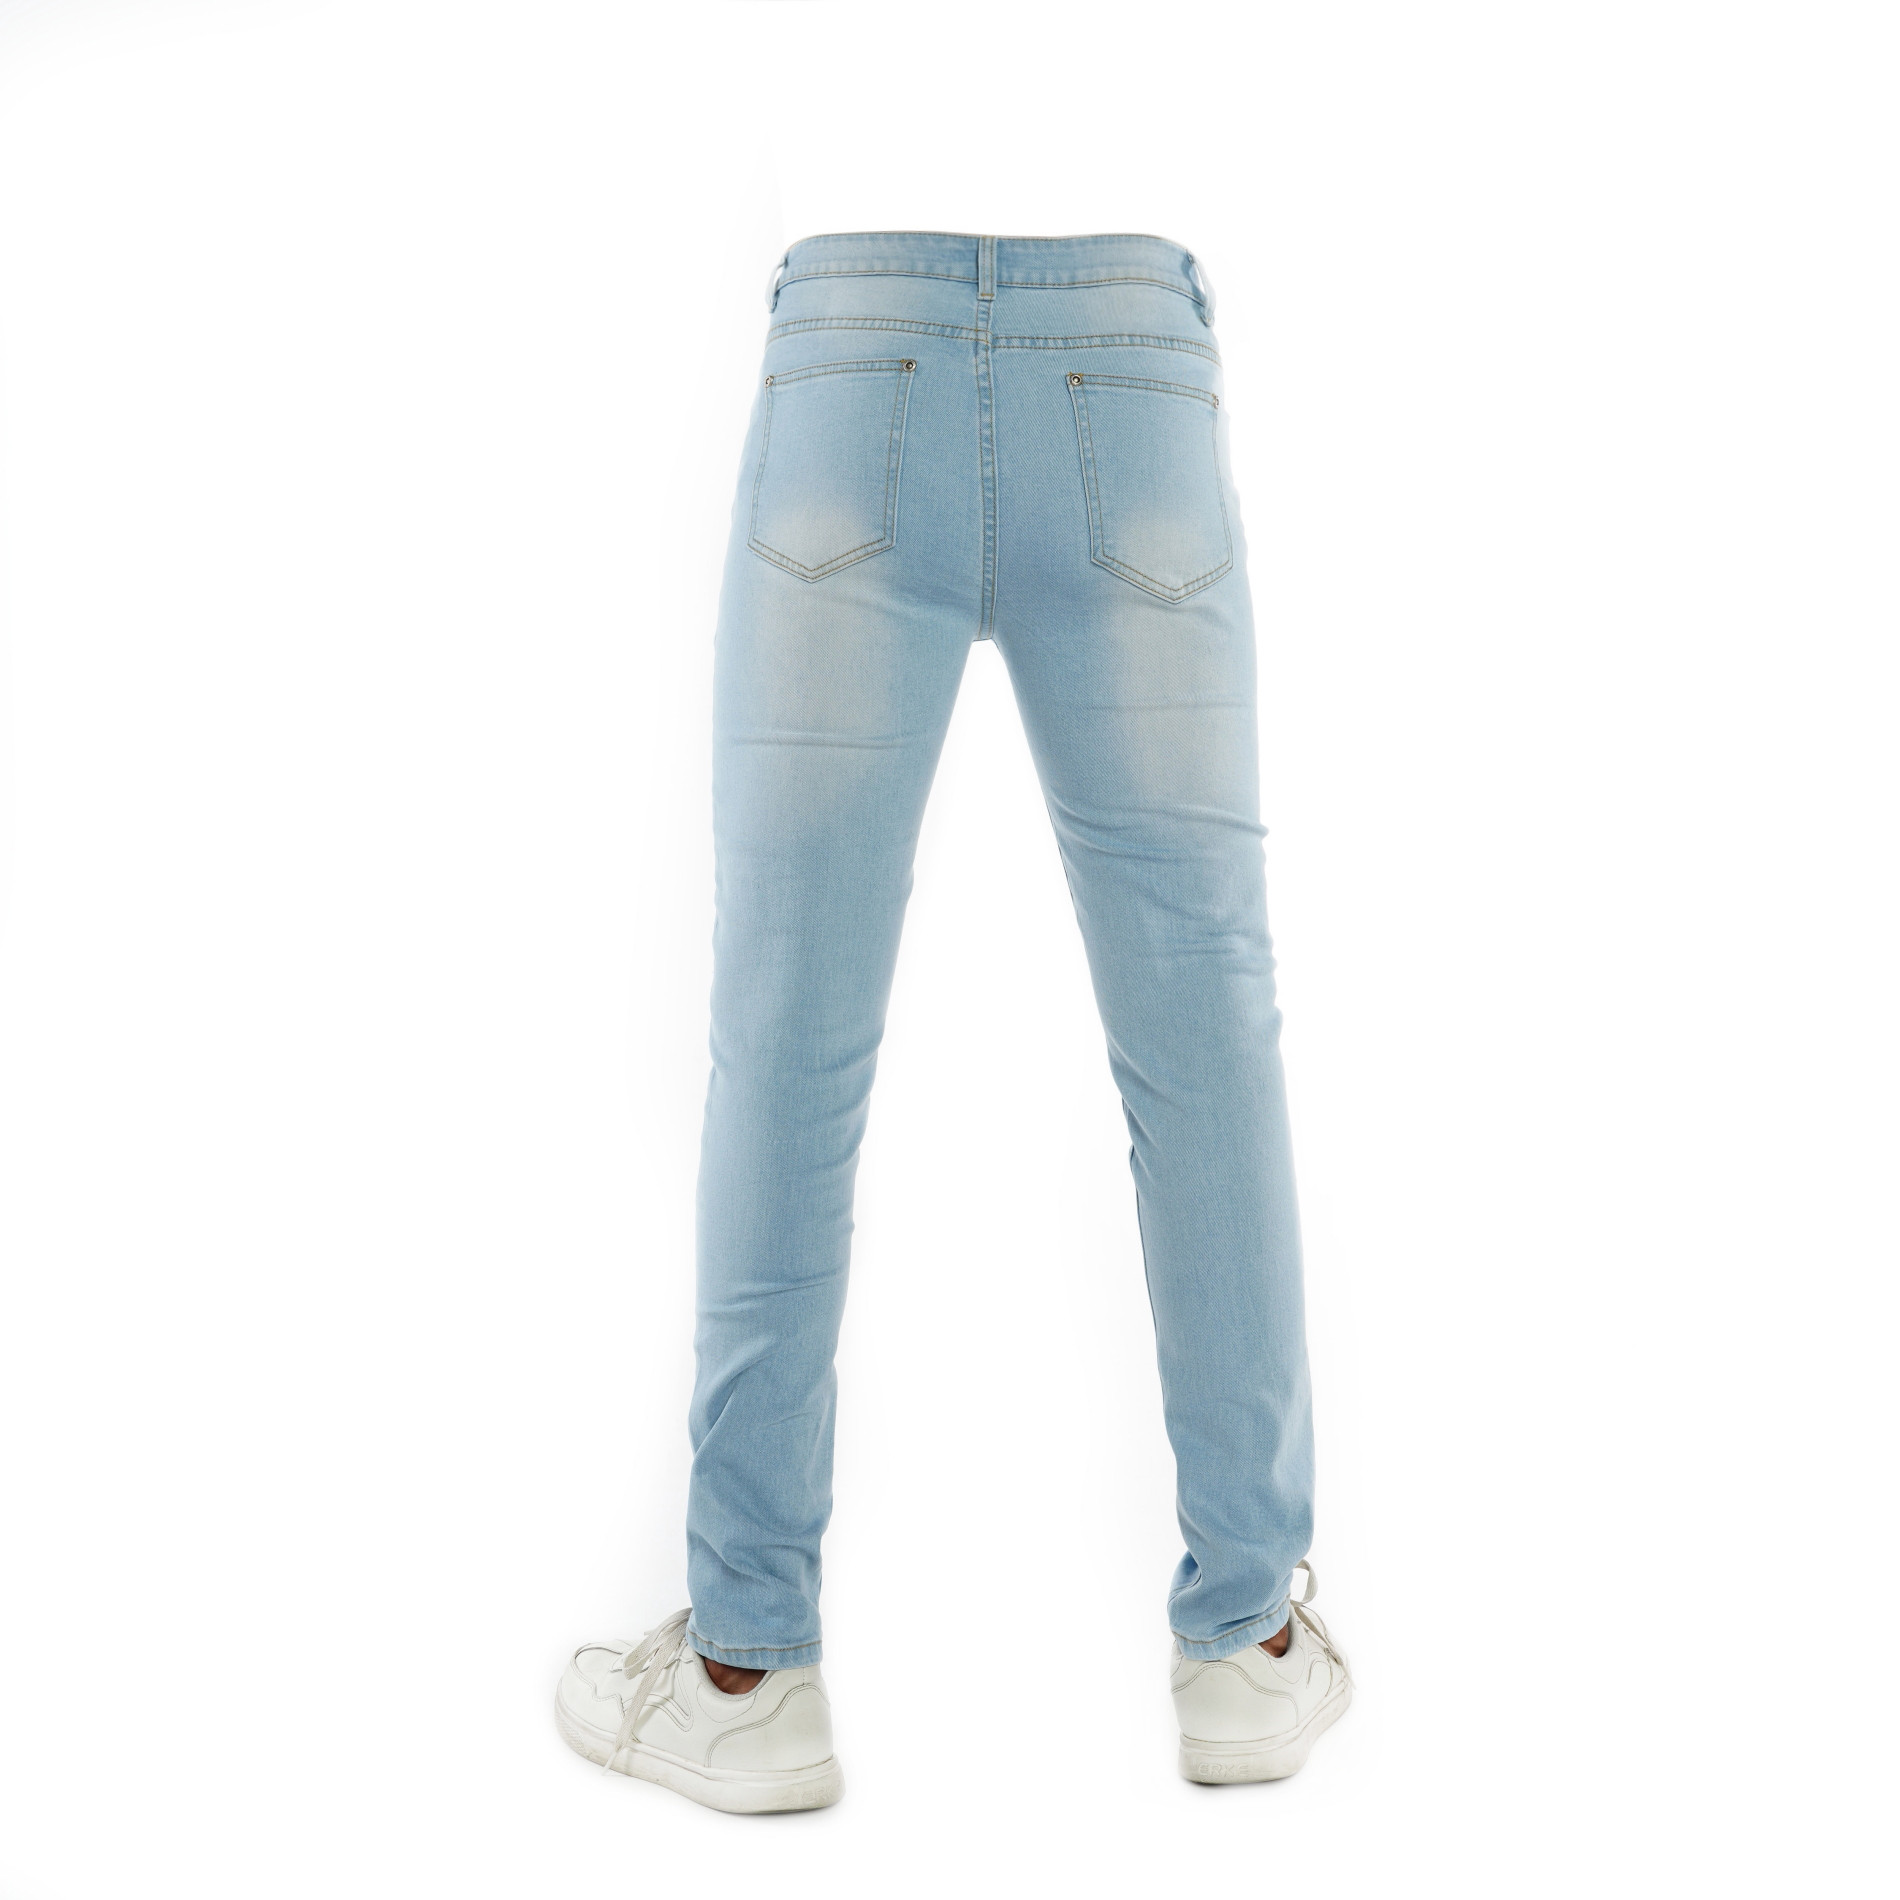 Custom ankle length skinny fit men ripped design blue jeans trousers